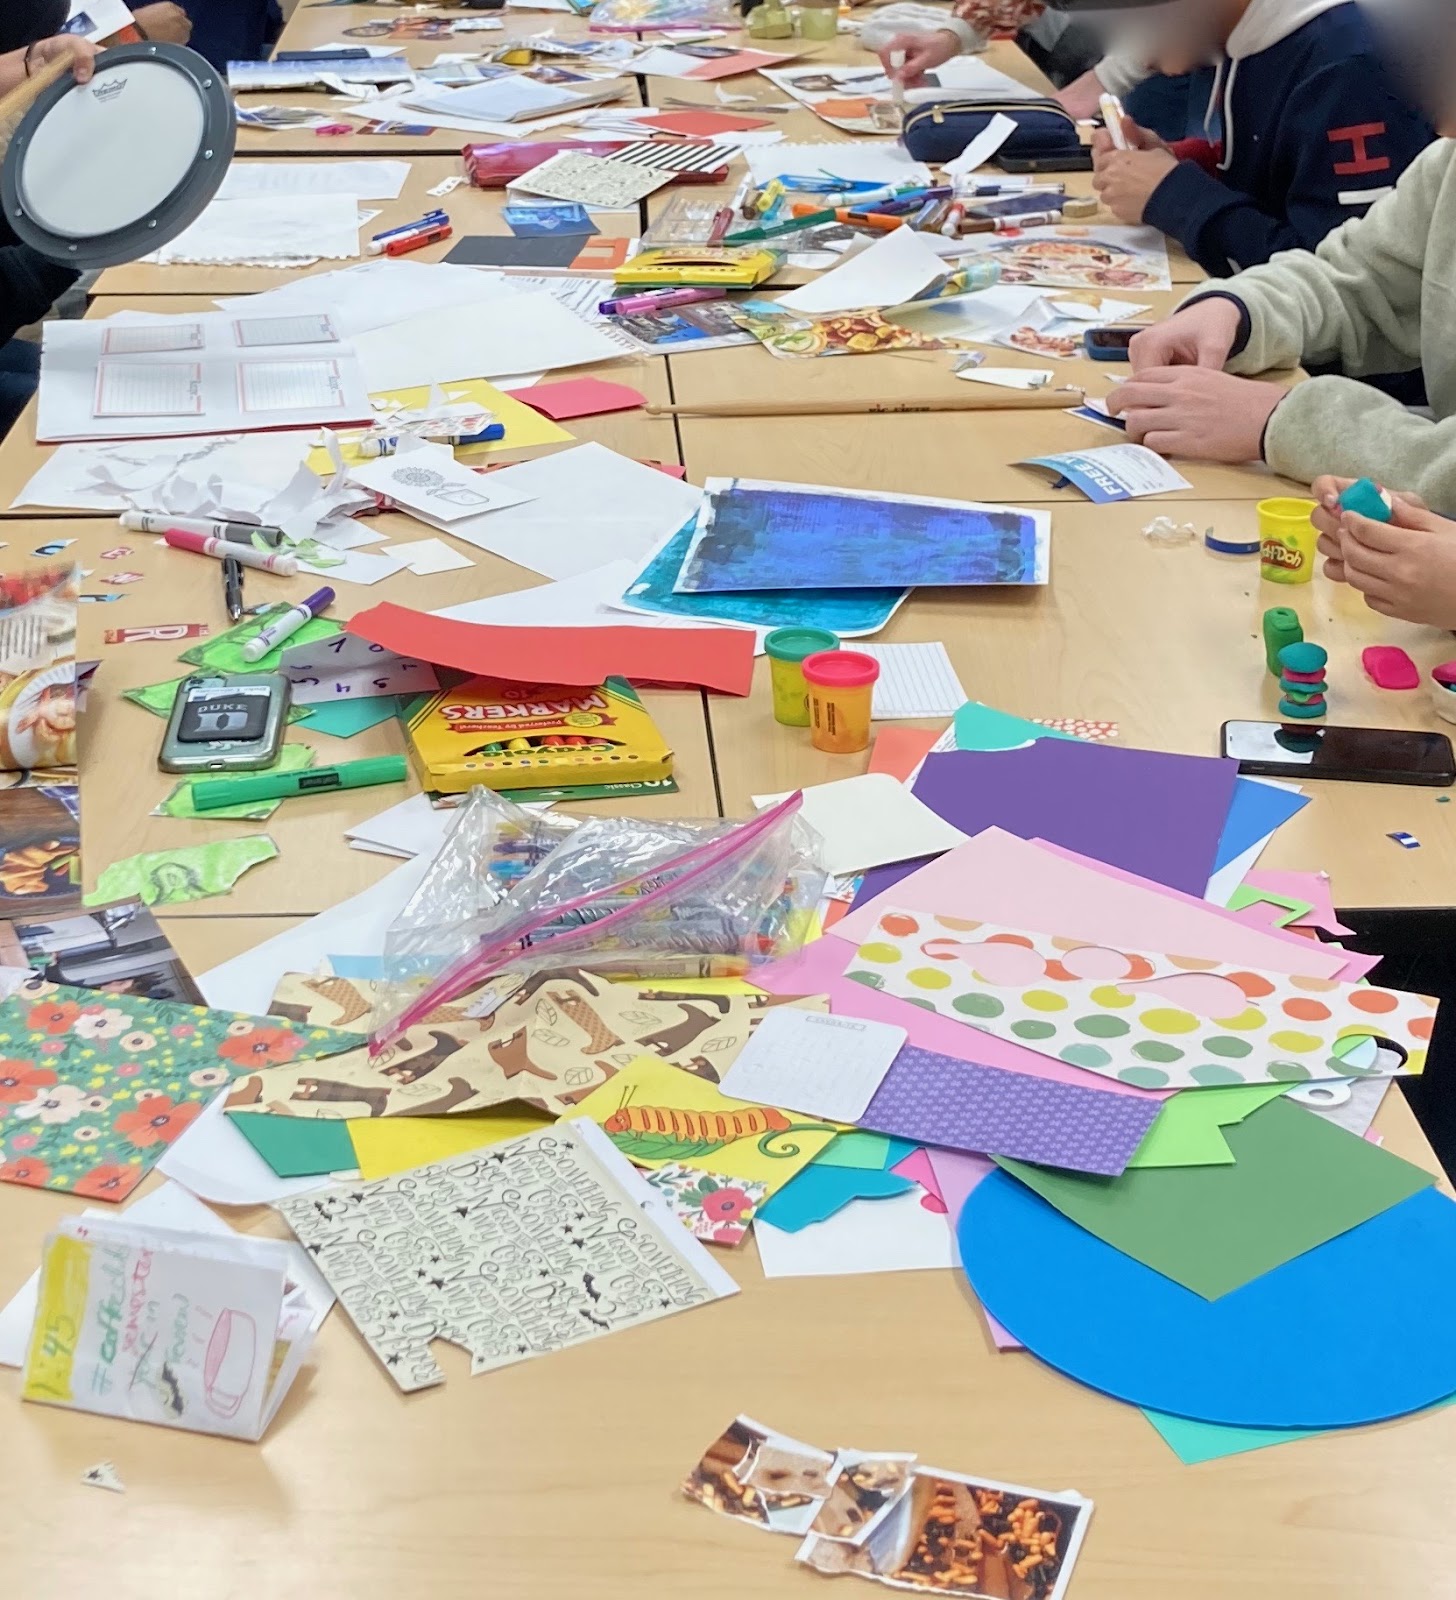 An image of a table covered in craft supplies with a few hands visible showing people creating artwork. 